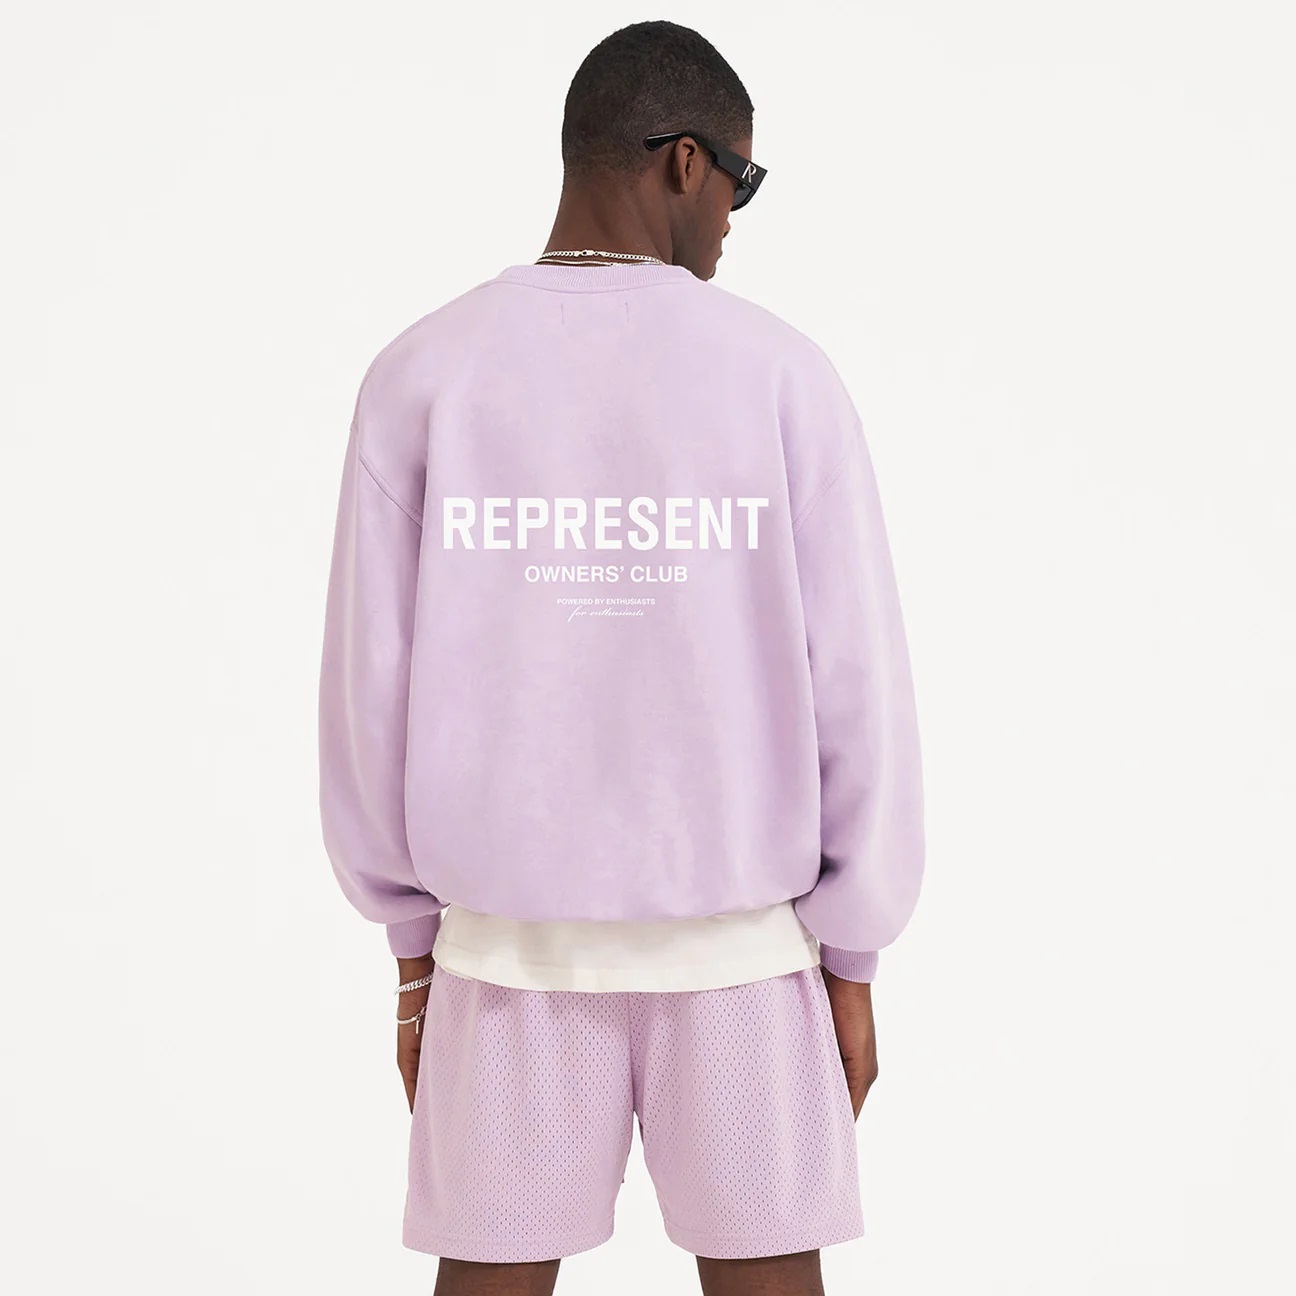 REPRESENT Owners Club Sweater in Pastel Lilac S